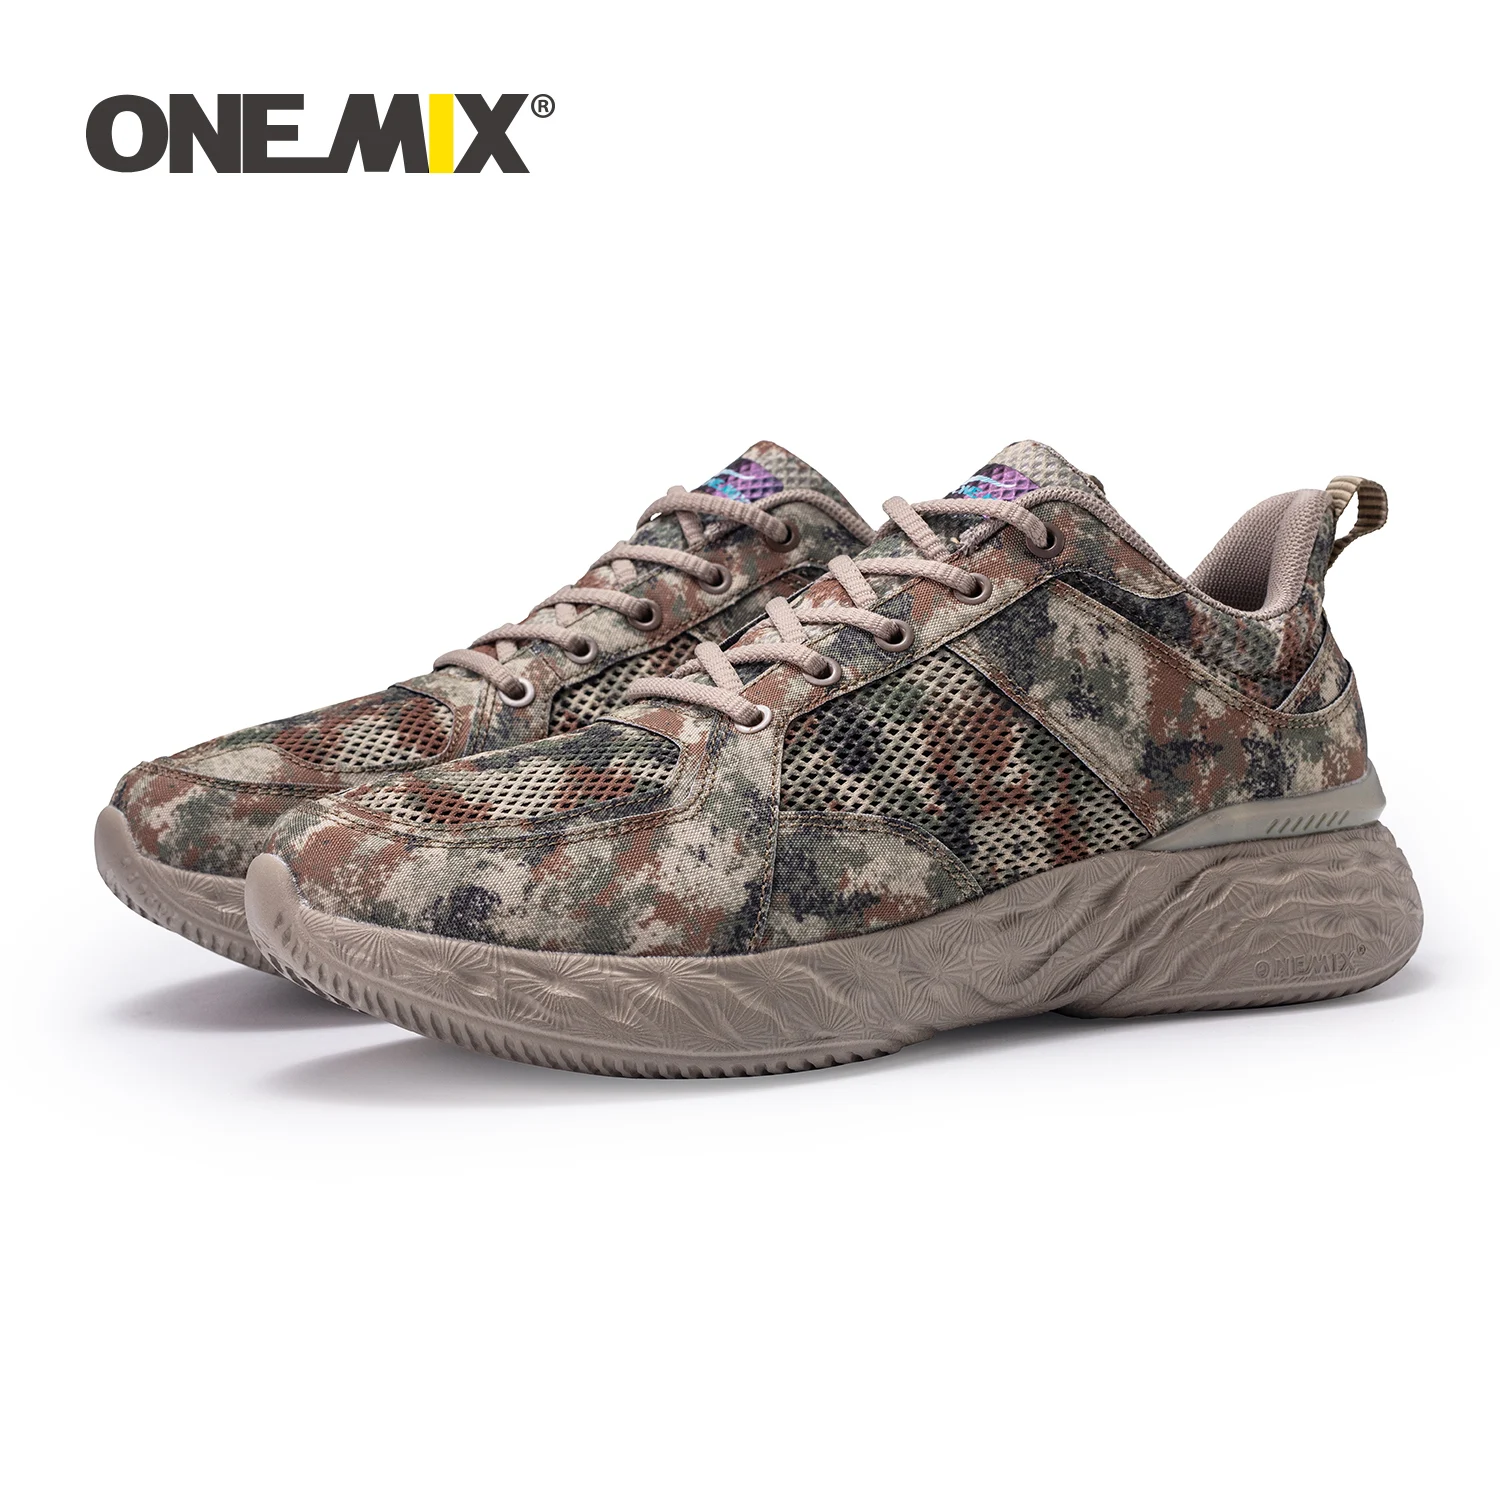 ONEMIX New Style Men's Running Shoes Unisex Sport Outdoor Sneakers Breathable Army Camouflage green Walking Jogging Shoes